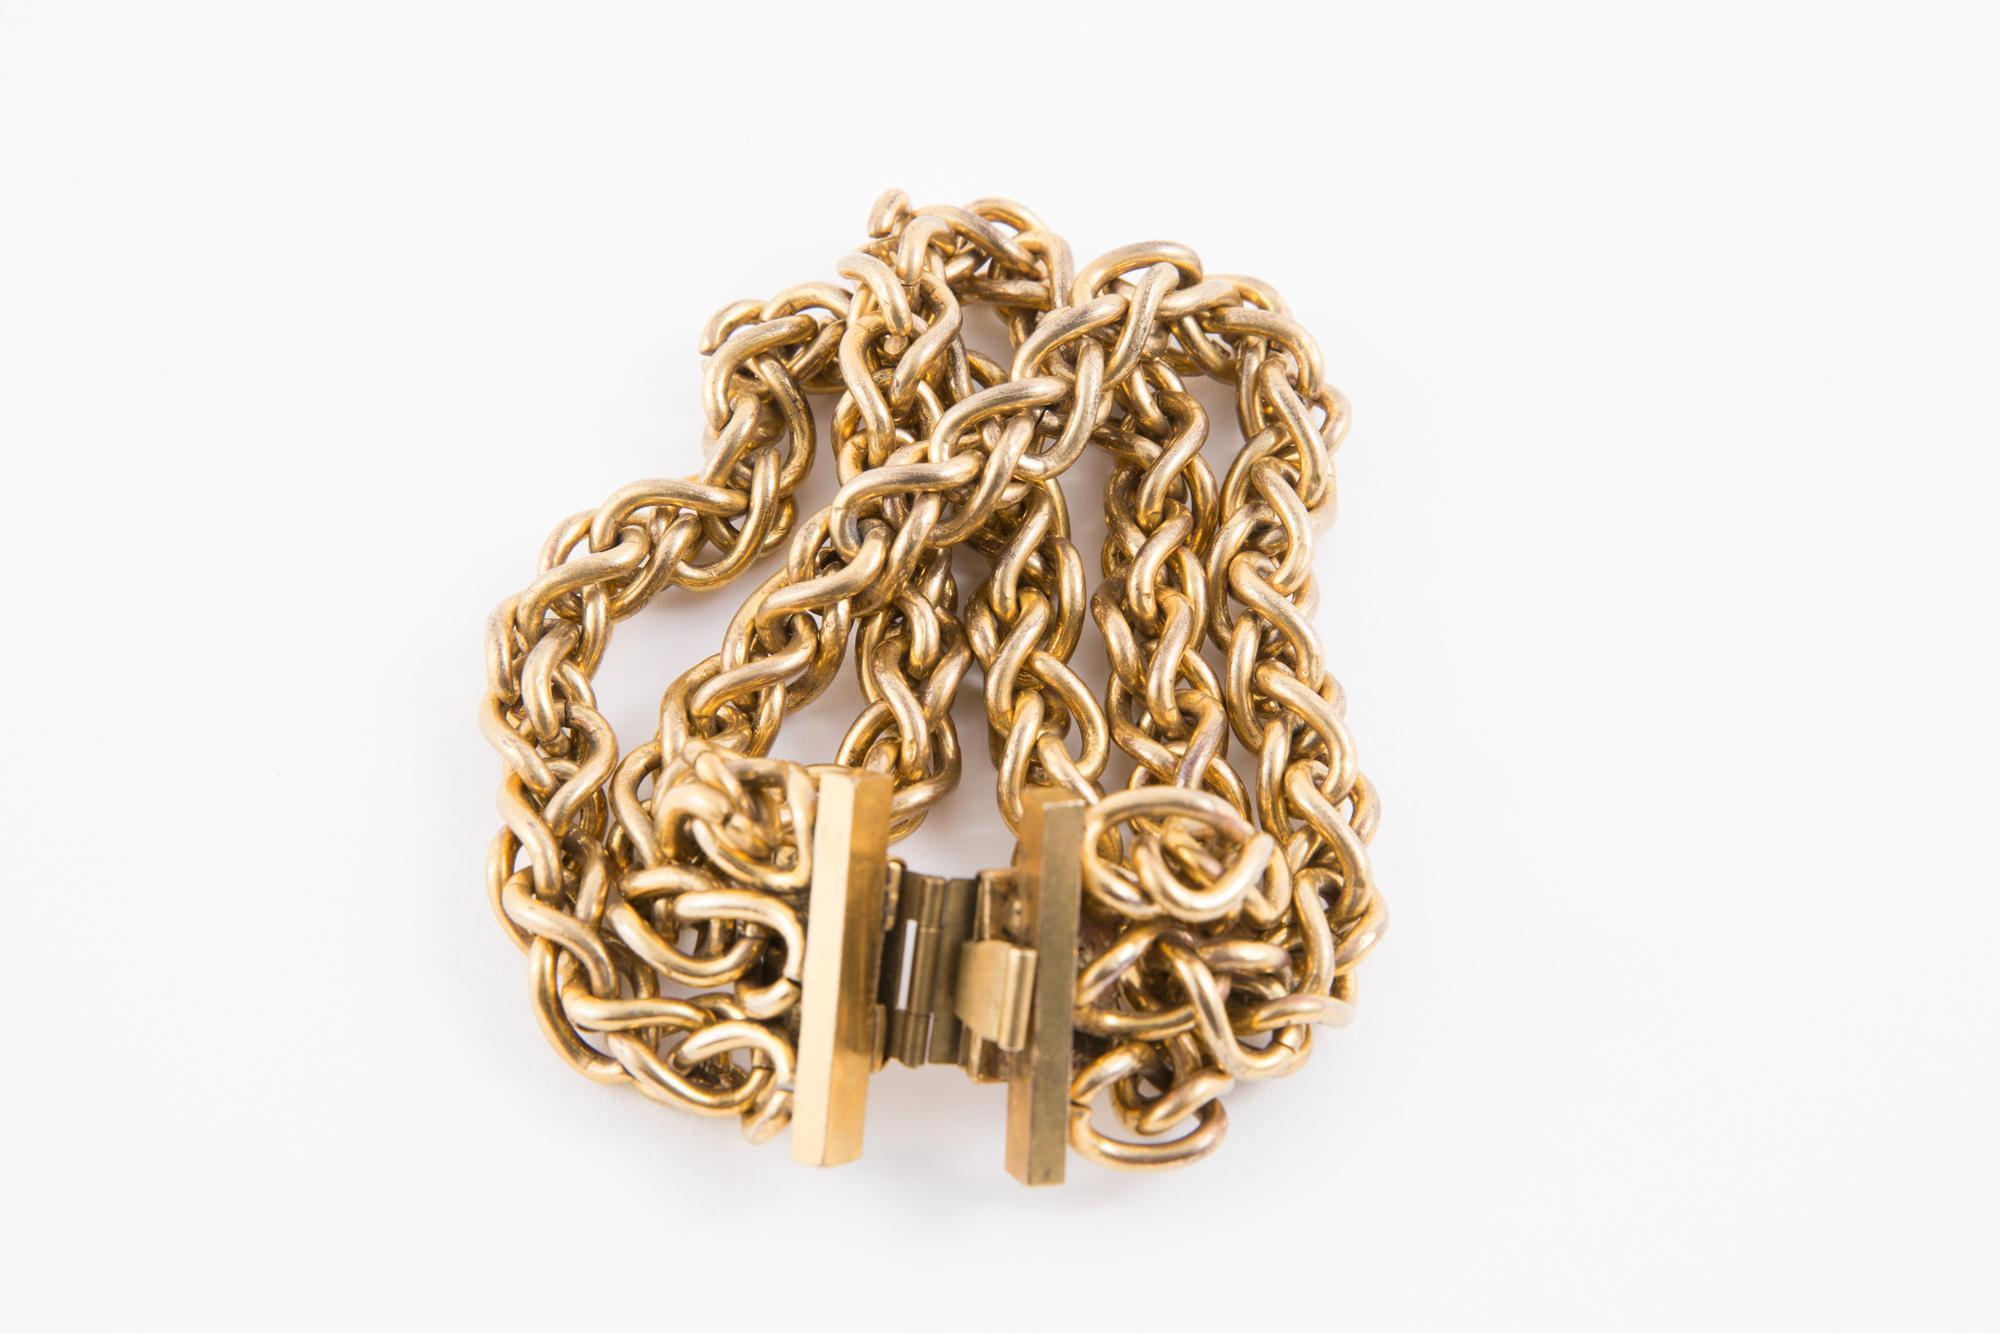 Edouard Rambaud gold tone chain bracelet featuring three rows curb chains, a logo plaque under the bracelet claps. 
Edouard Rambaud is known for the large statement pieces he designed in the 1980s, specifically for runway shows.
In good vintage